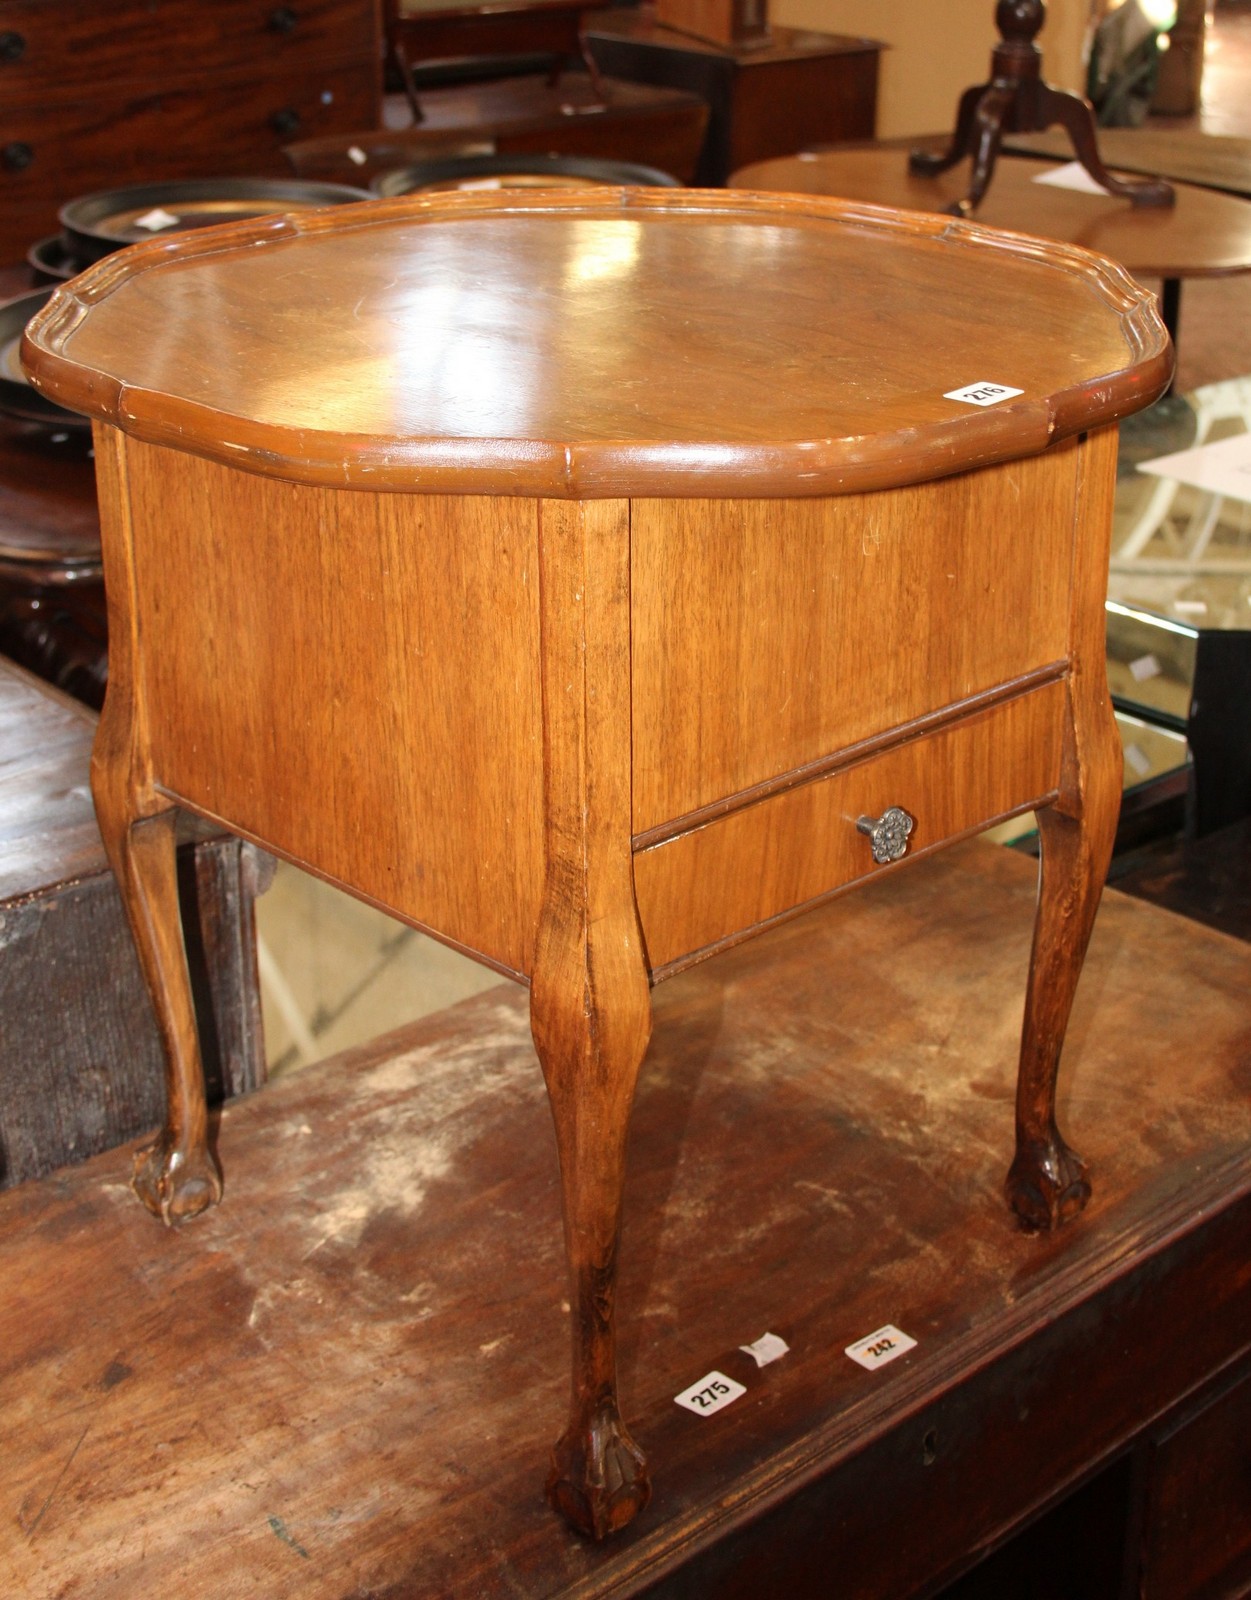 A 1930's walnut sewing table with a hinged top.